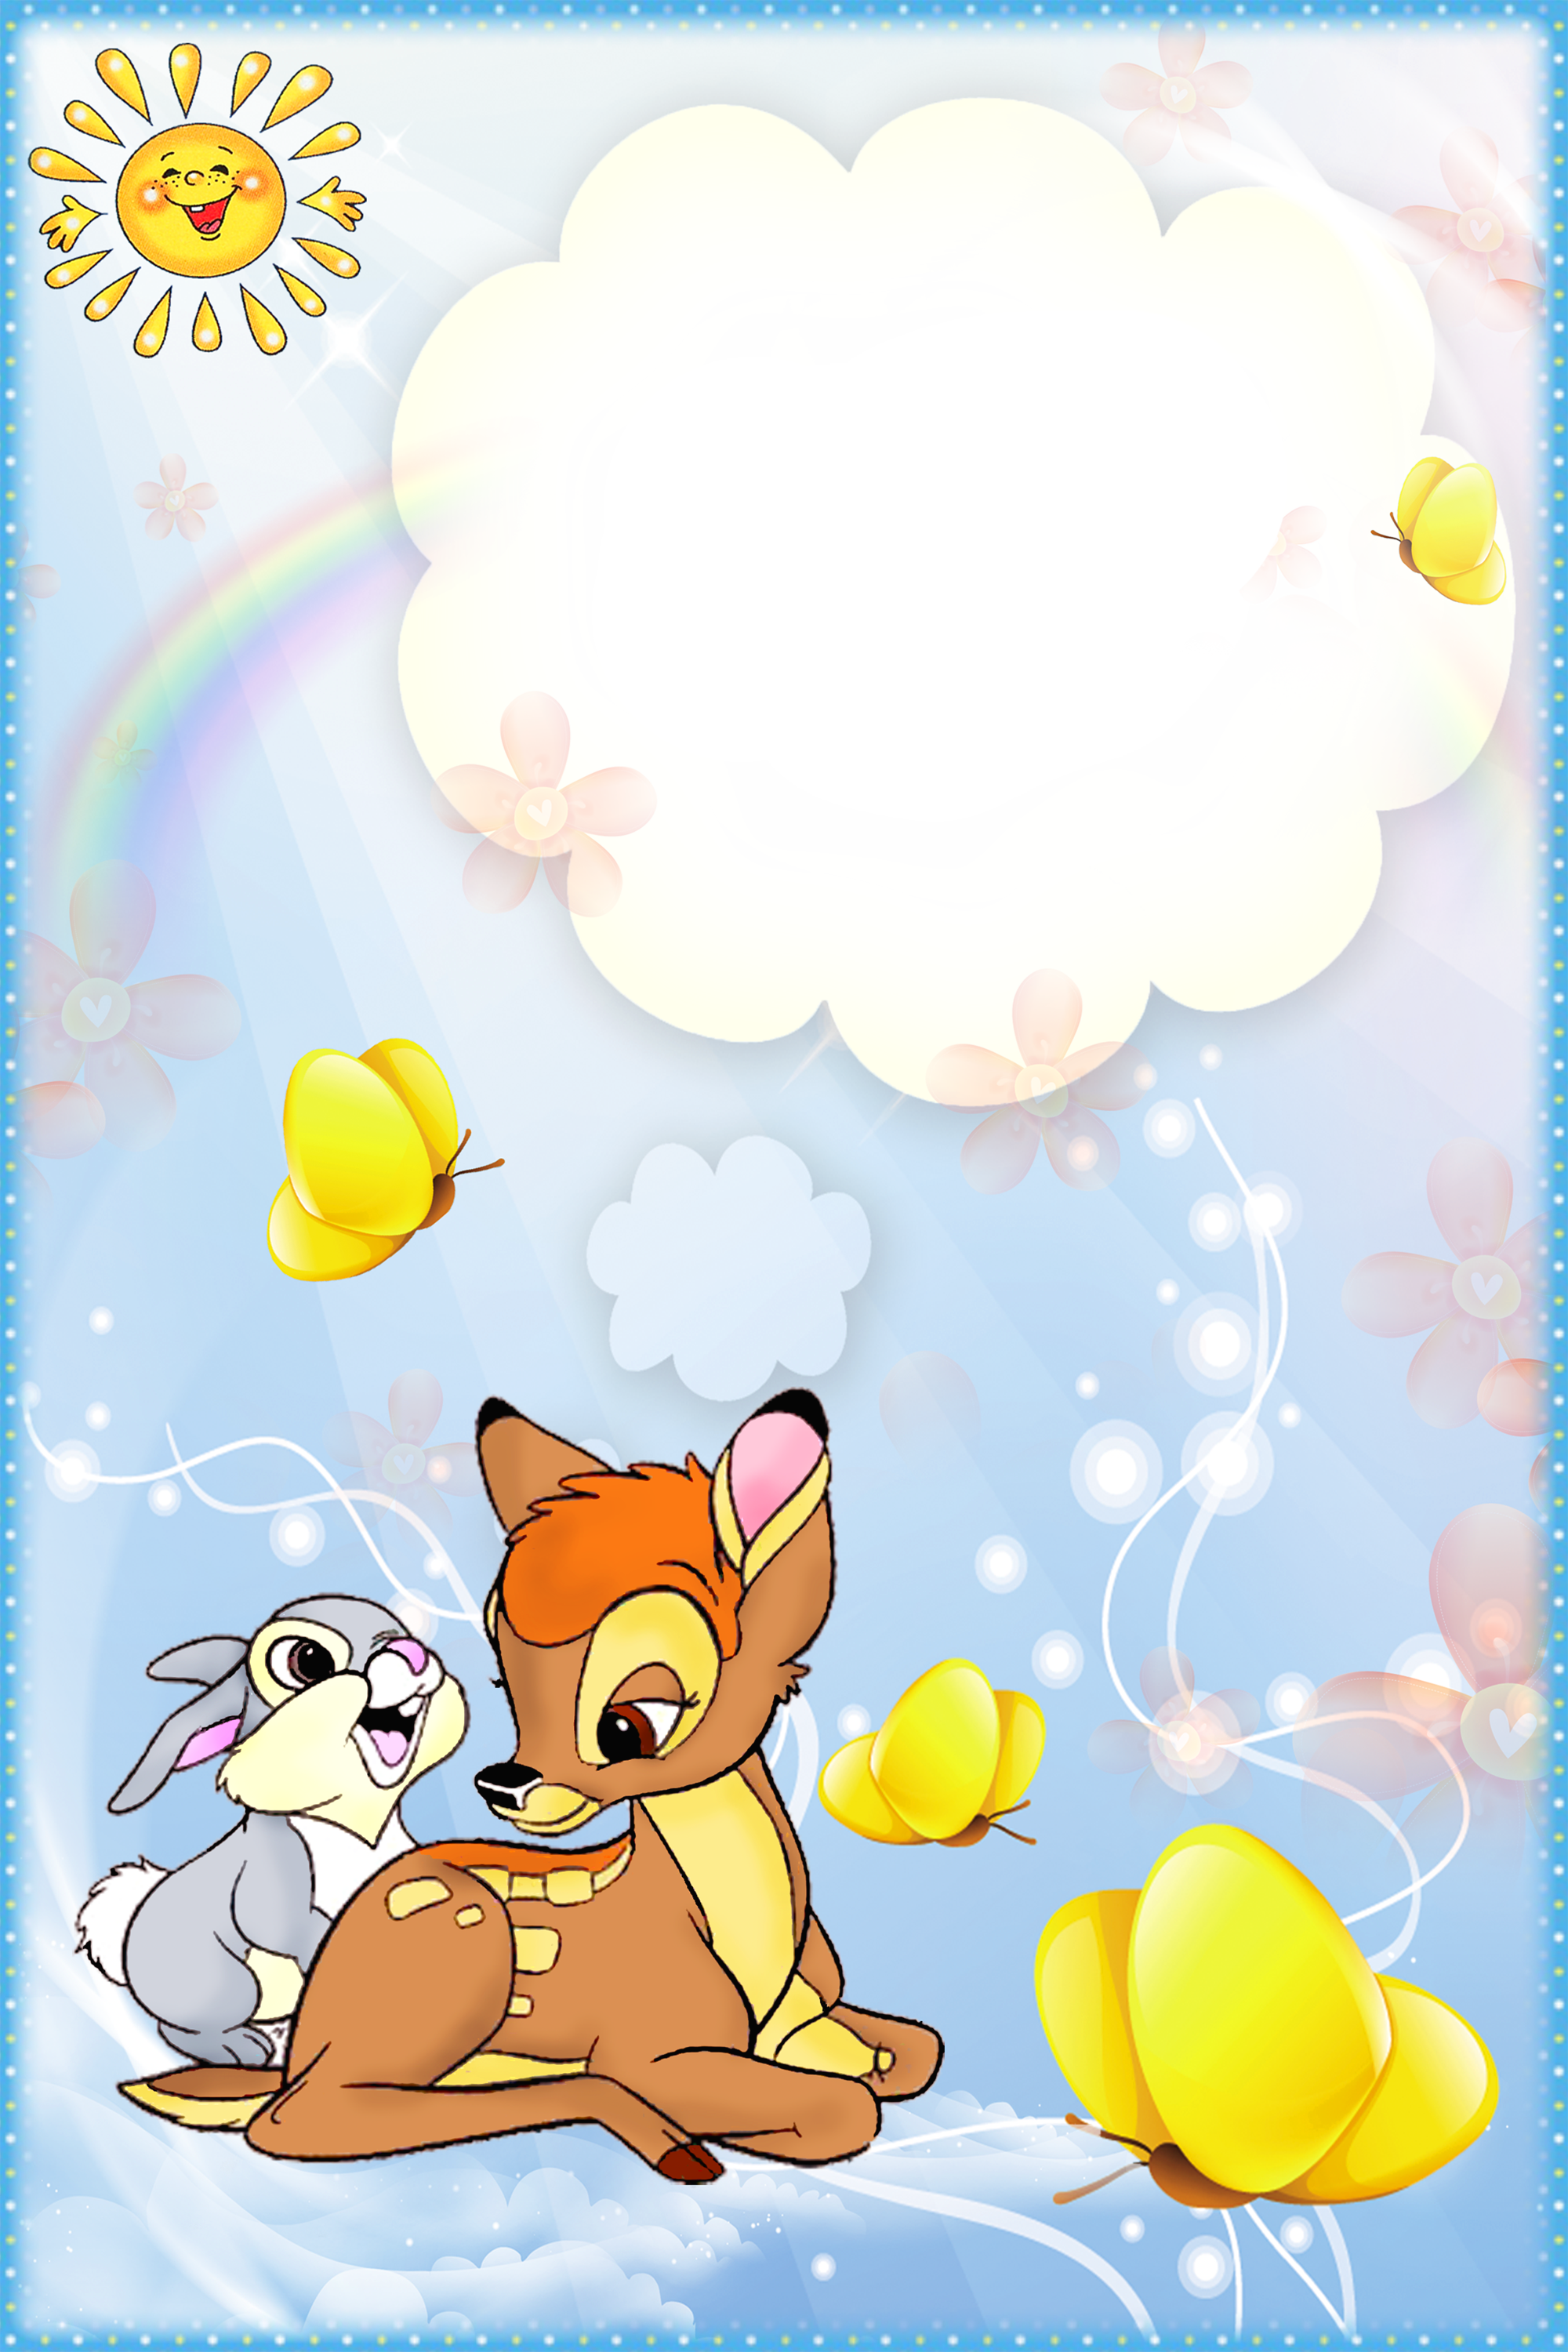 Kids Transparent PNG Frame with Rabbit and Deer | Gallery Yopriceville - High-Quality ...